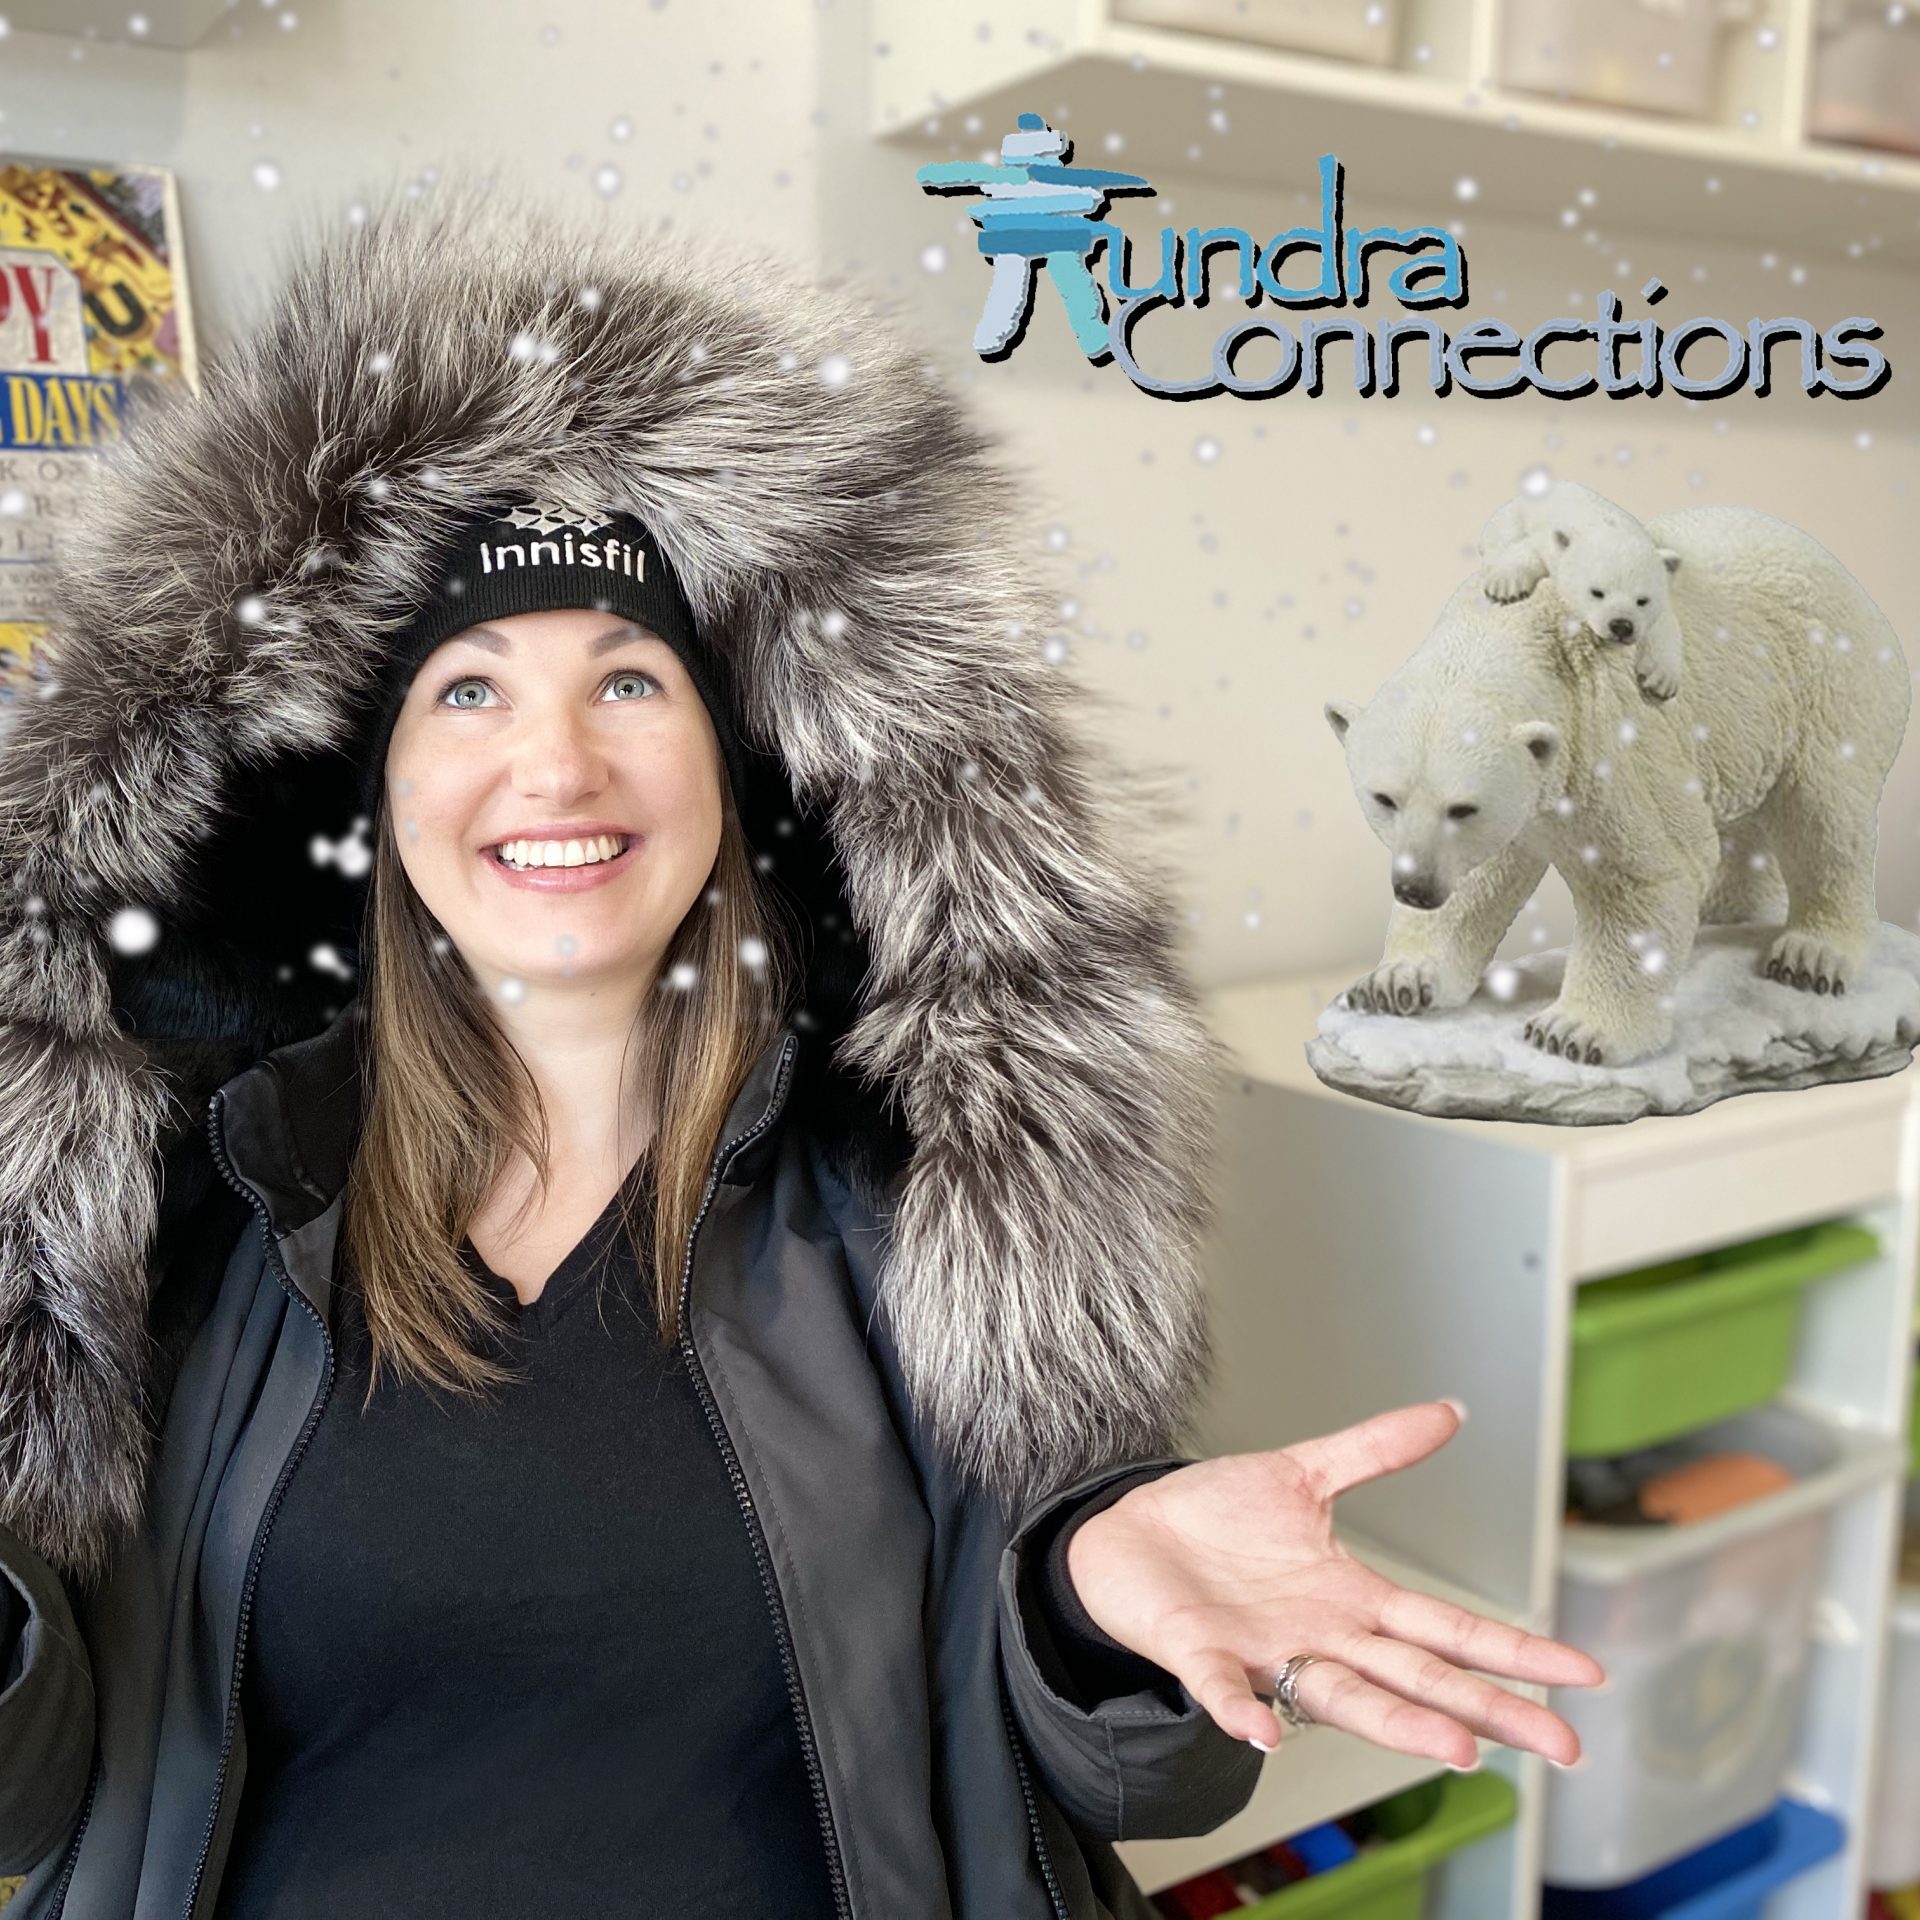 Tundra Connections